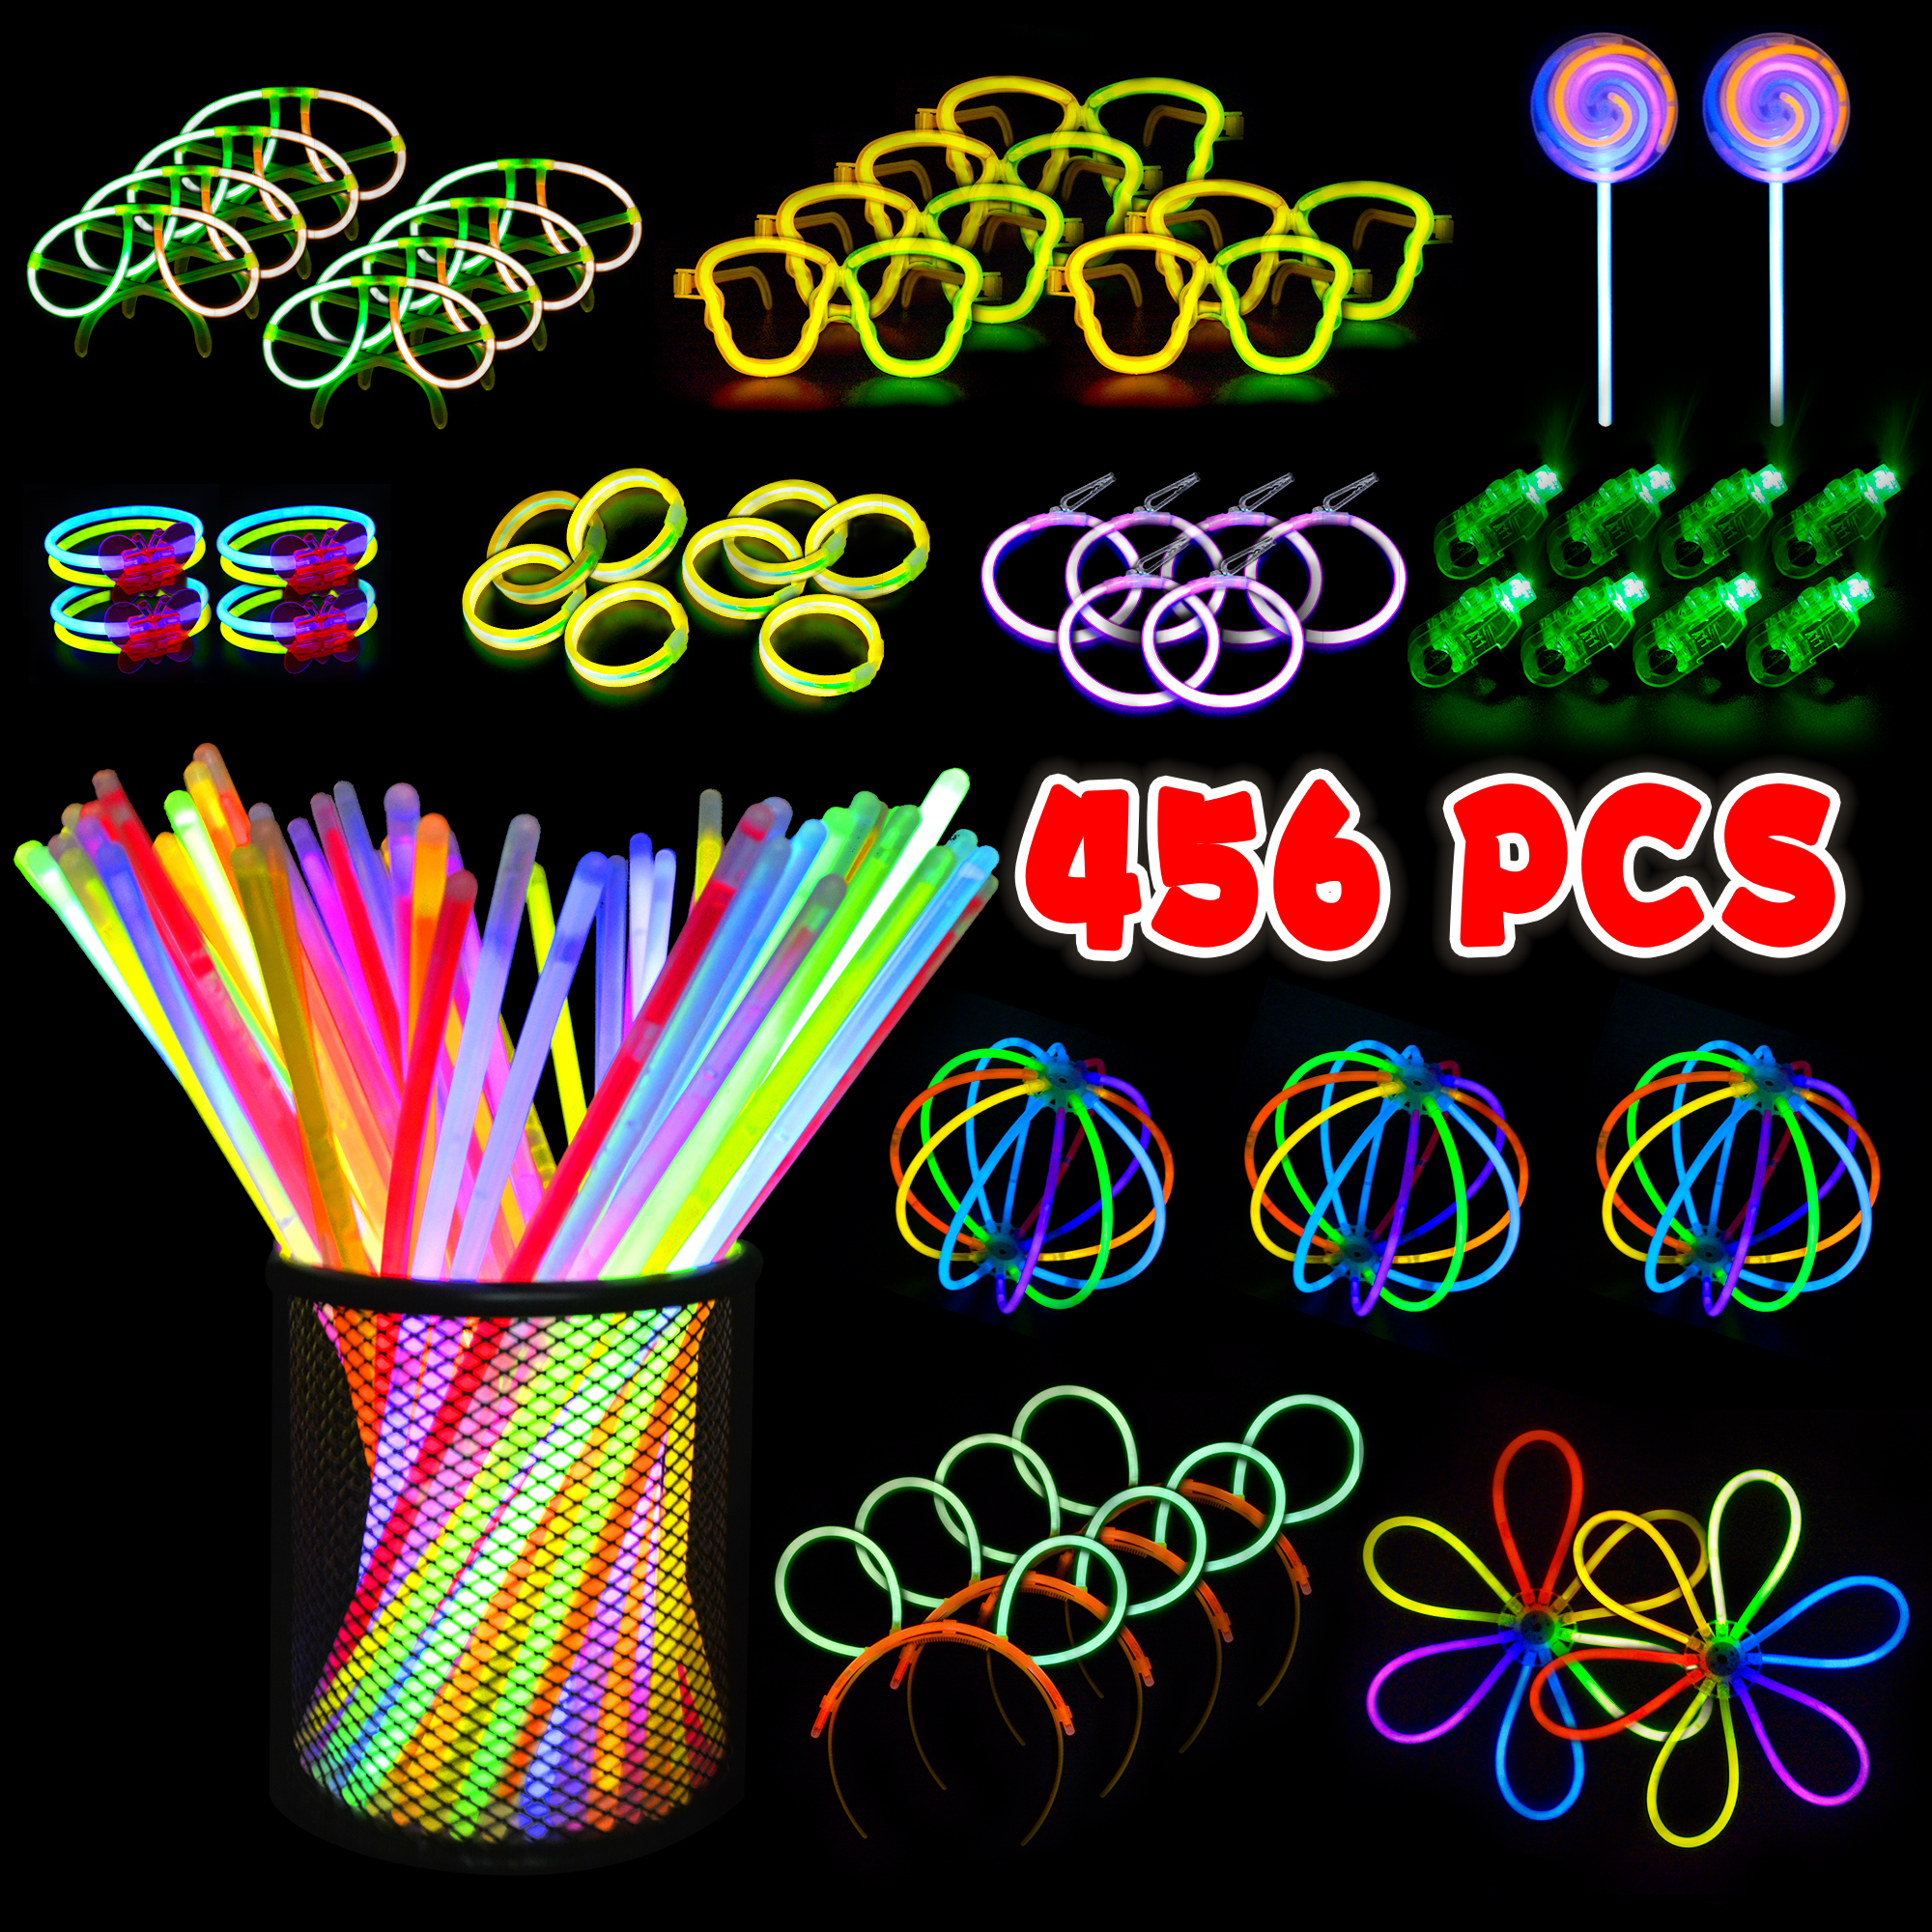 ABC 456 Pcs Glow Sticks Bulk Halloween Birthday Party Concert Pack Gifts  Ultra Bright Glow in The Dark 7 Colors Neon Party Supplies Basket Stuffers  Glow Bracelet with Connectors for Kids Adults 